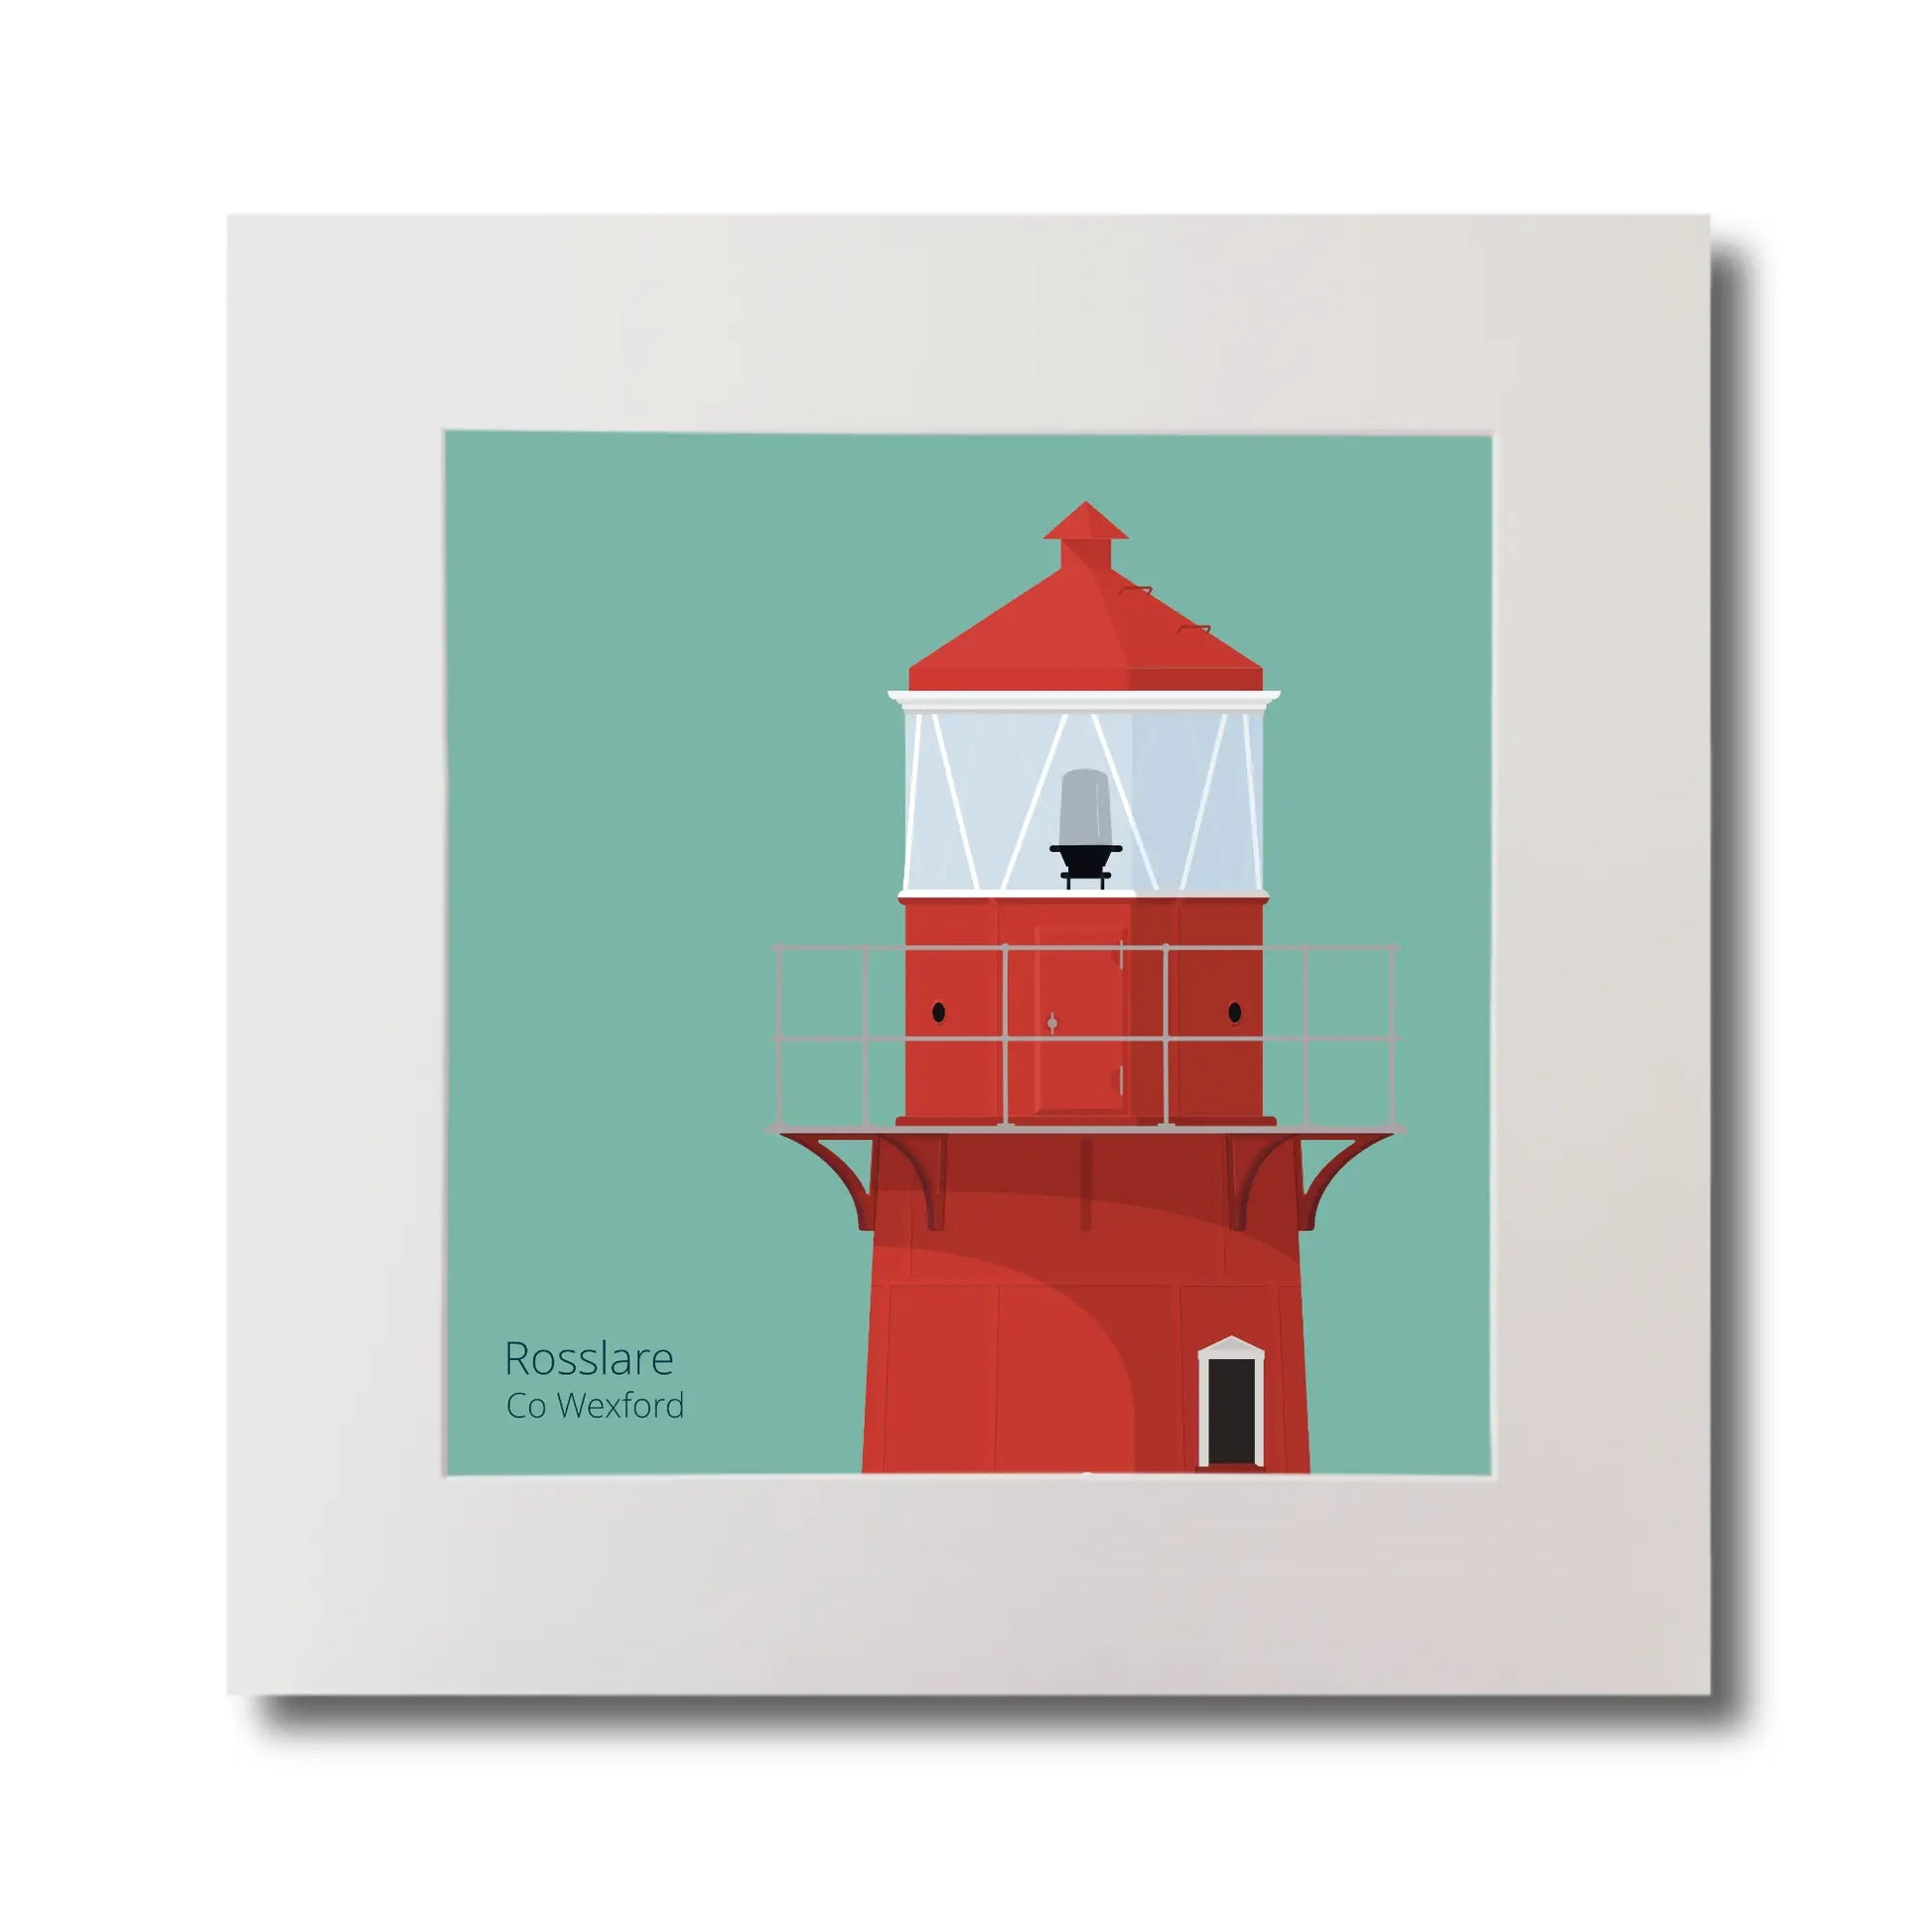 Illustration of Rosslare Harbour lighthouse on an ocean green background, mounted and measuring 30x30cm.